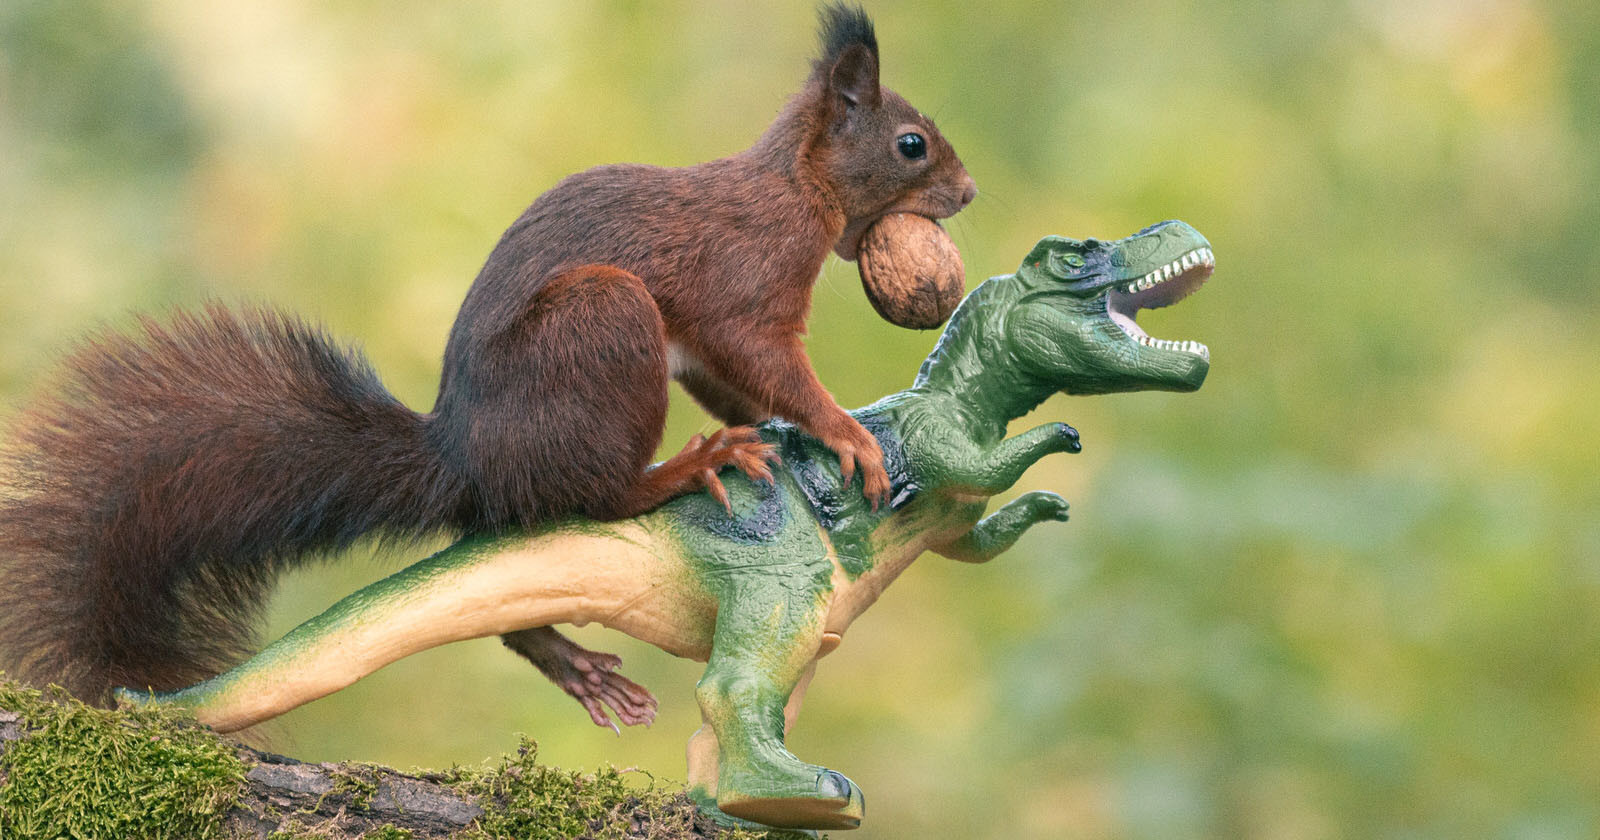  photographer captures squirrels playing dinosaurs 